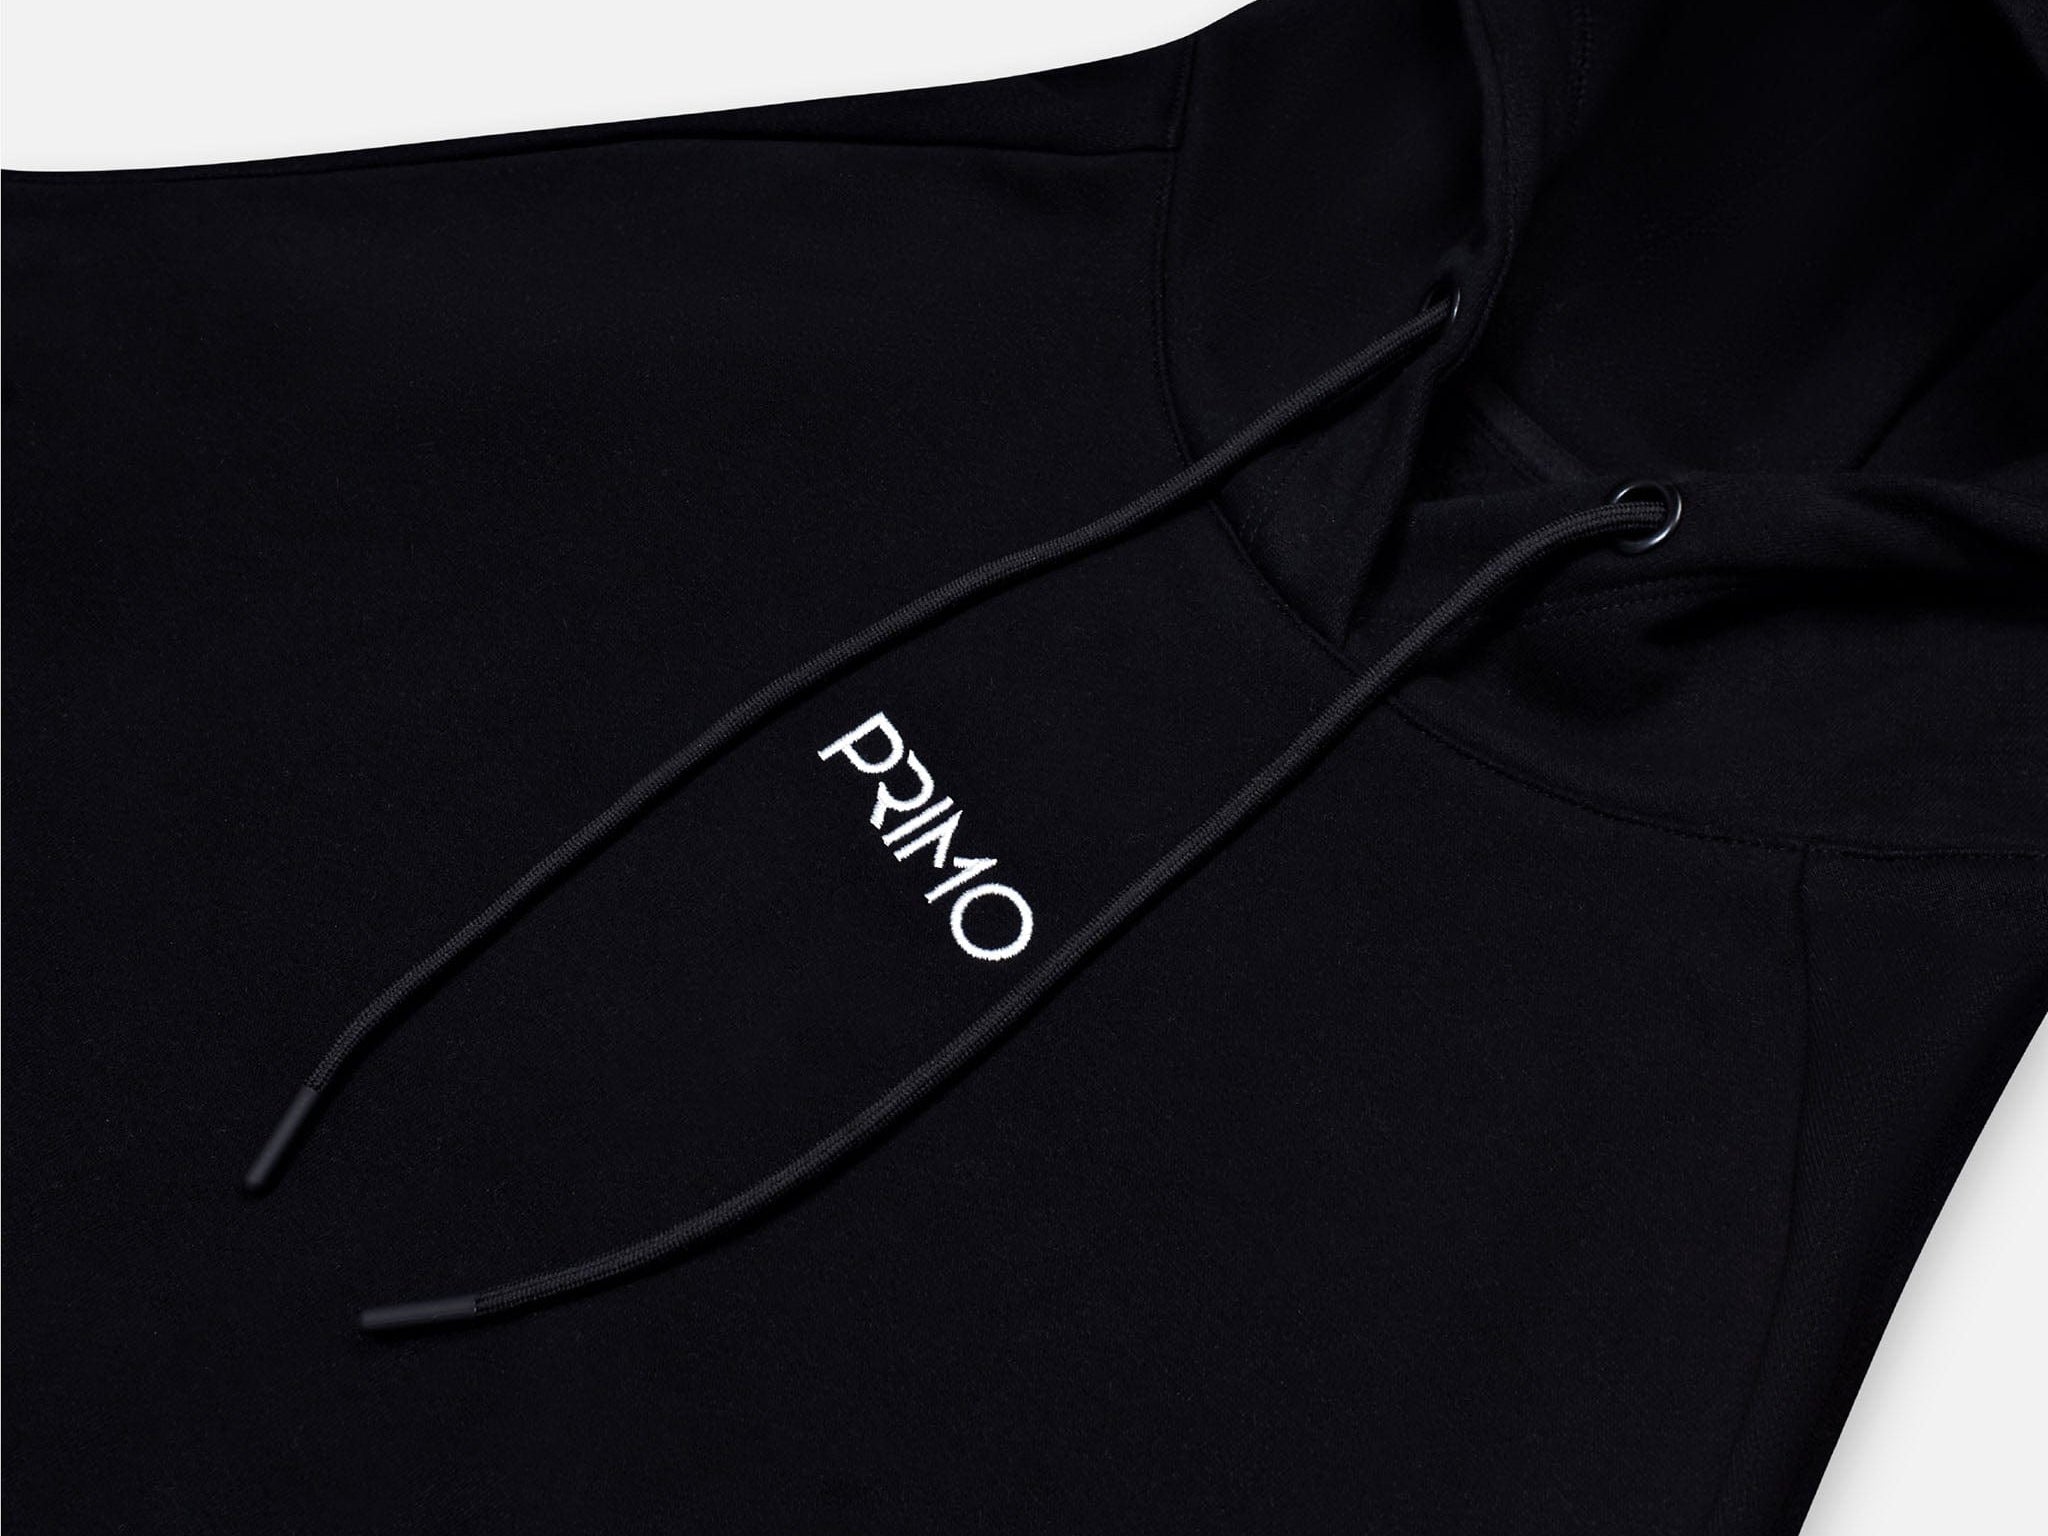 Primo Fight Wear Official Primo Day One Hoodie - Black